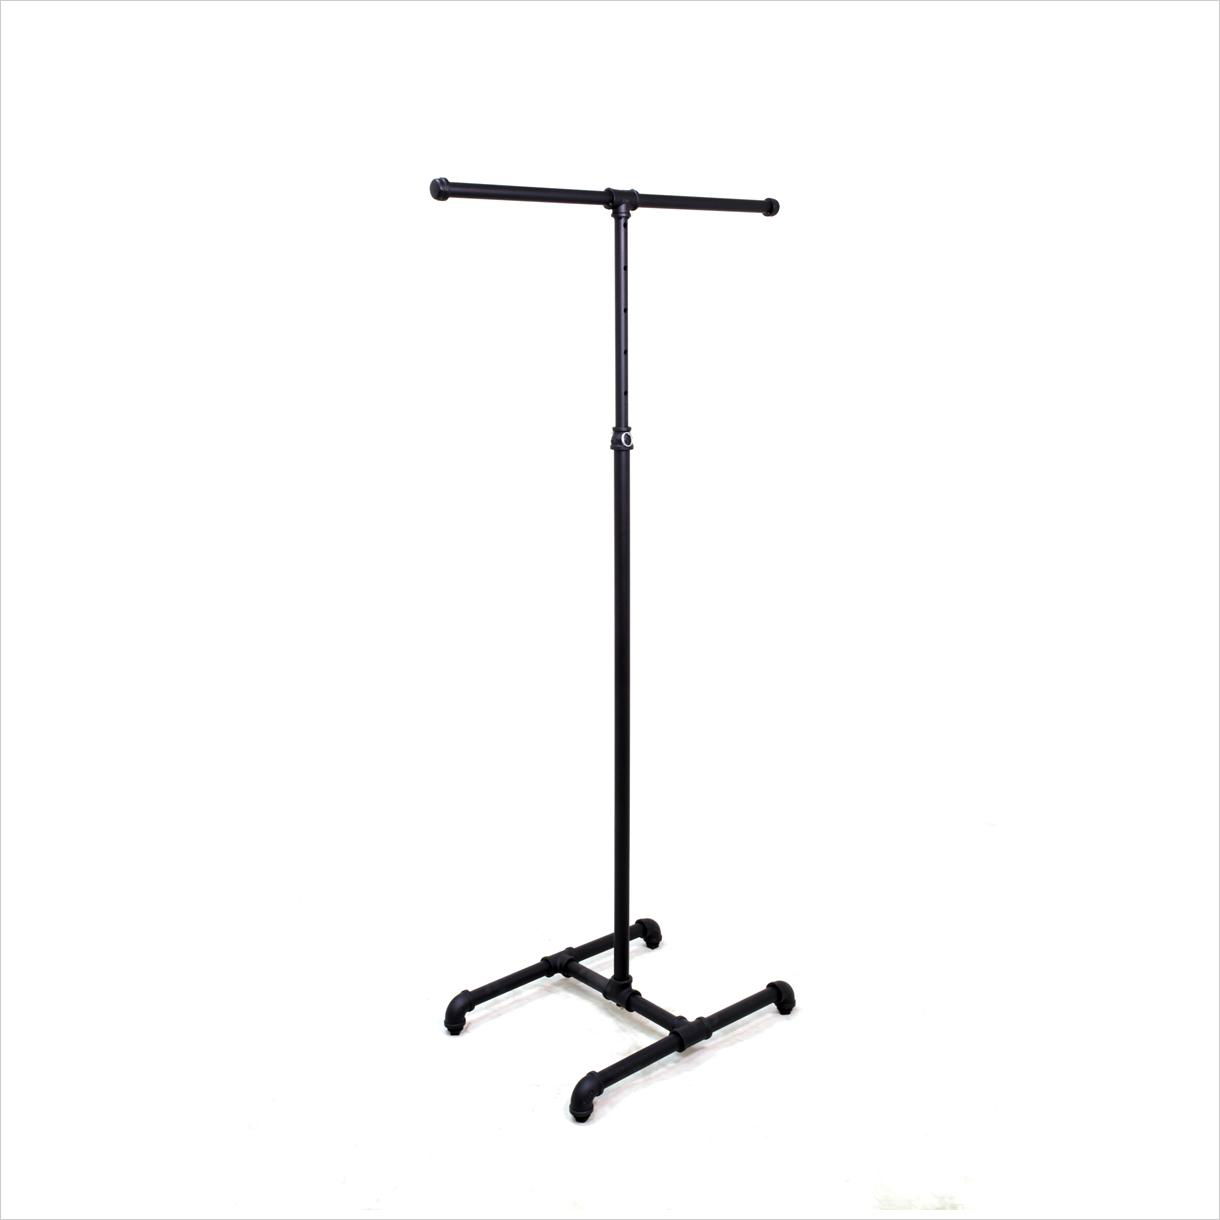 2 way pipeline rack with independently adjustable arms in anthracite grey finish